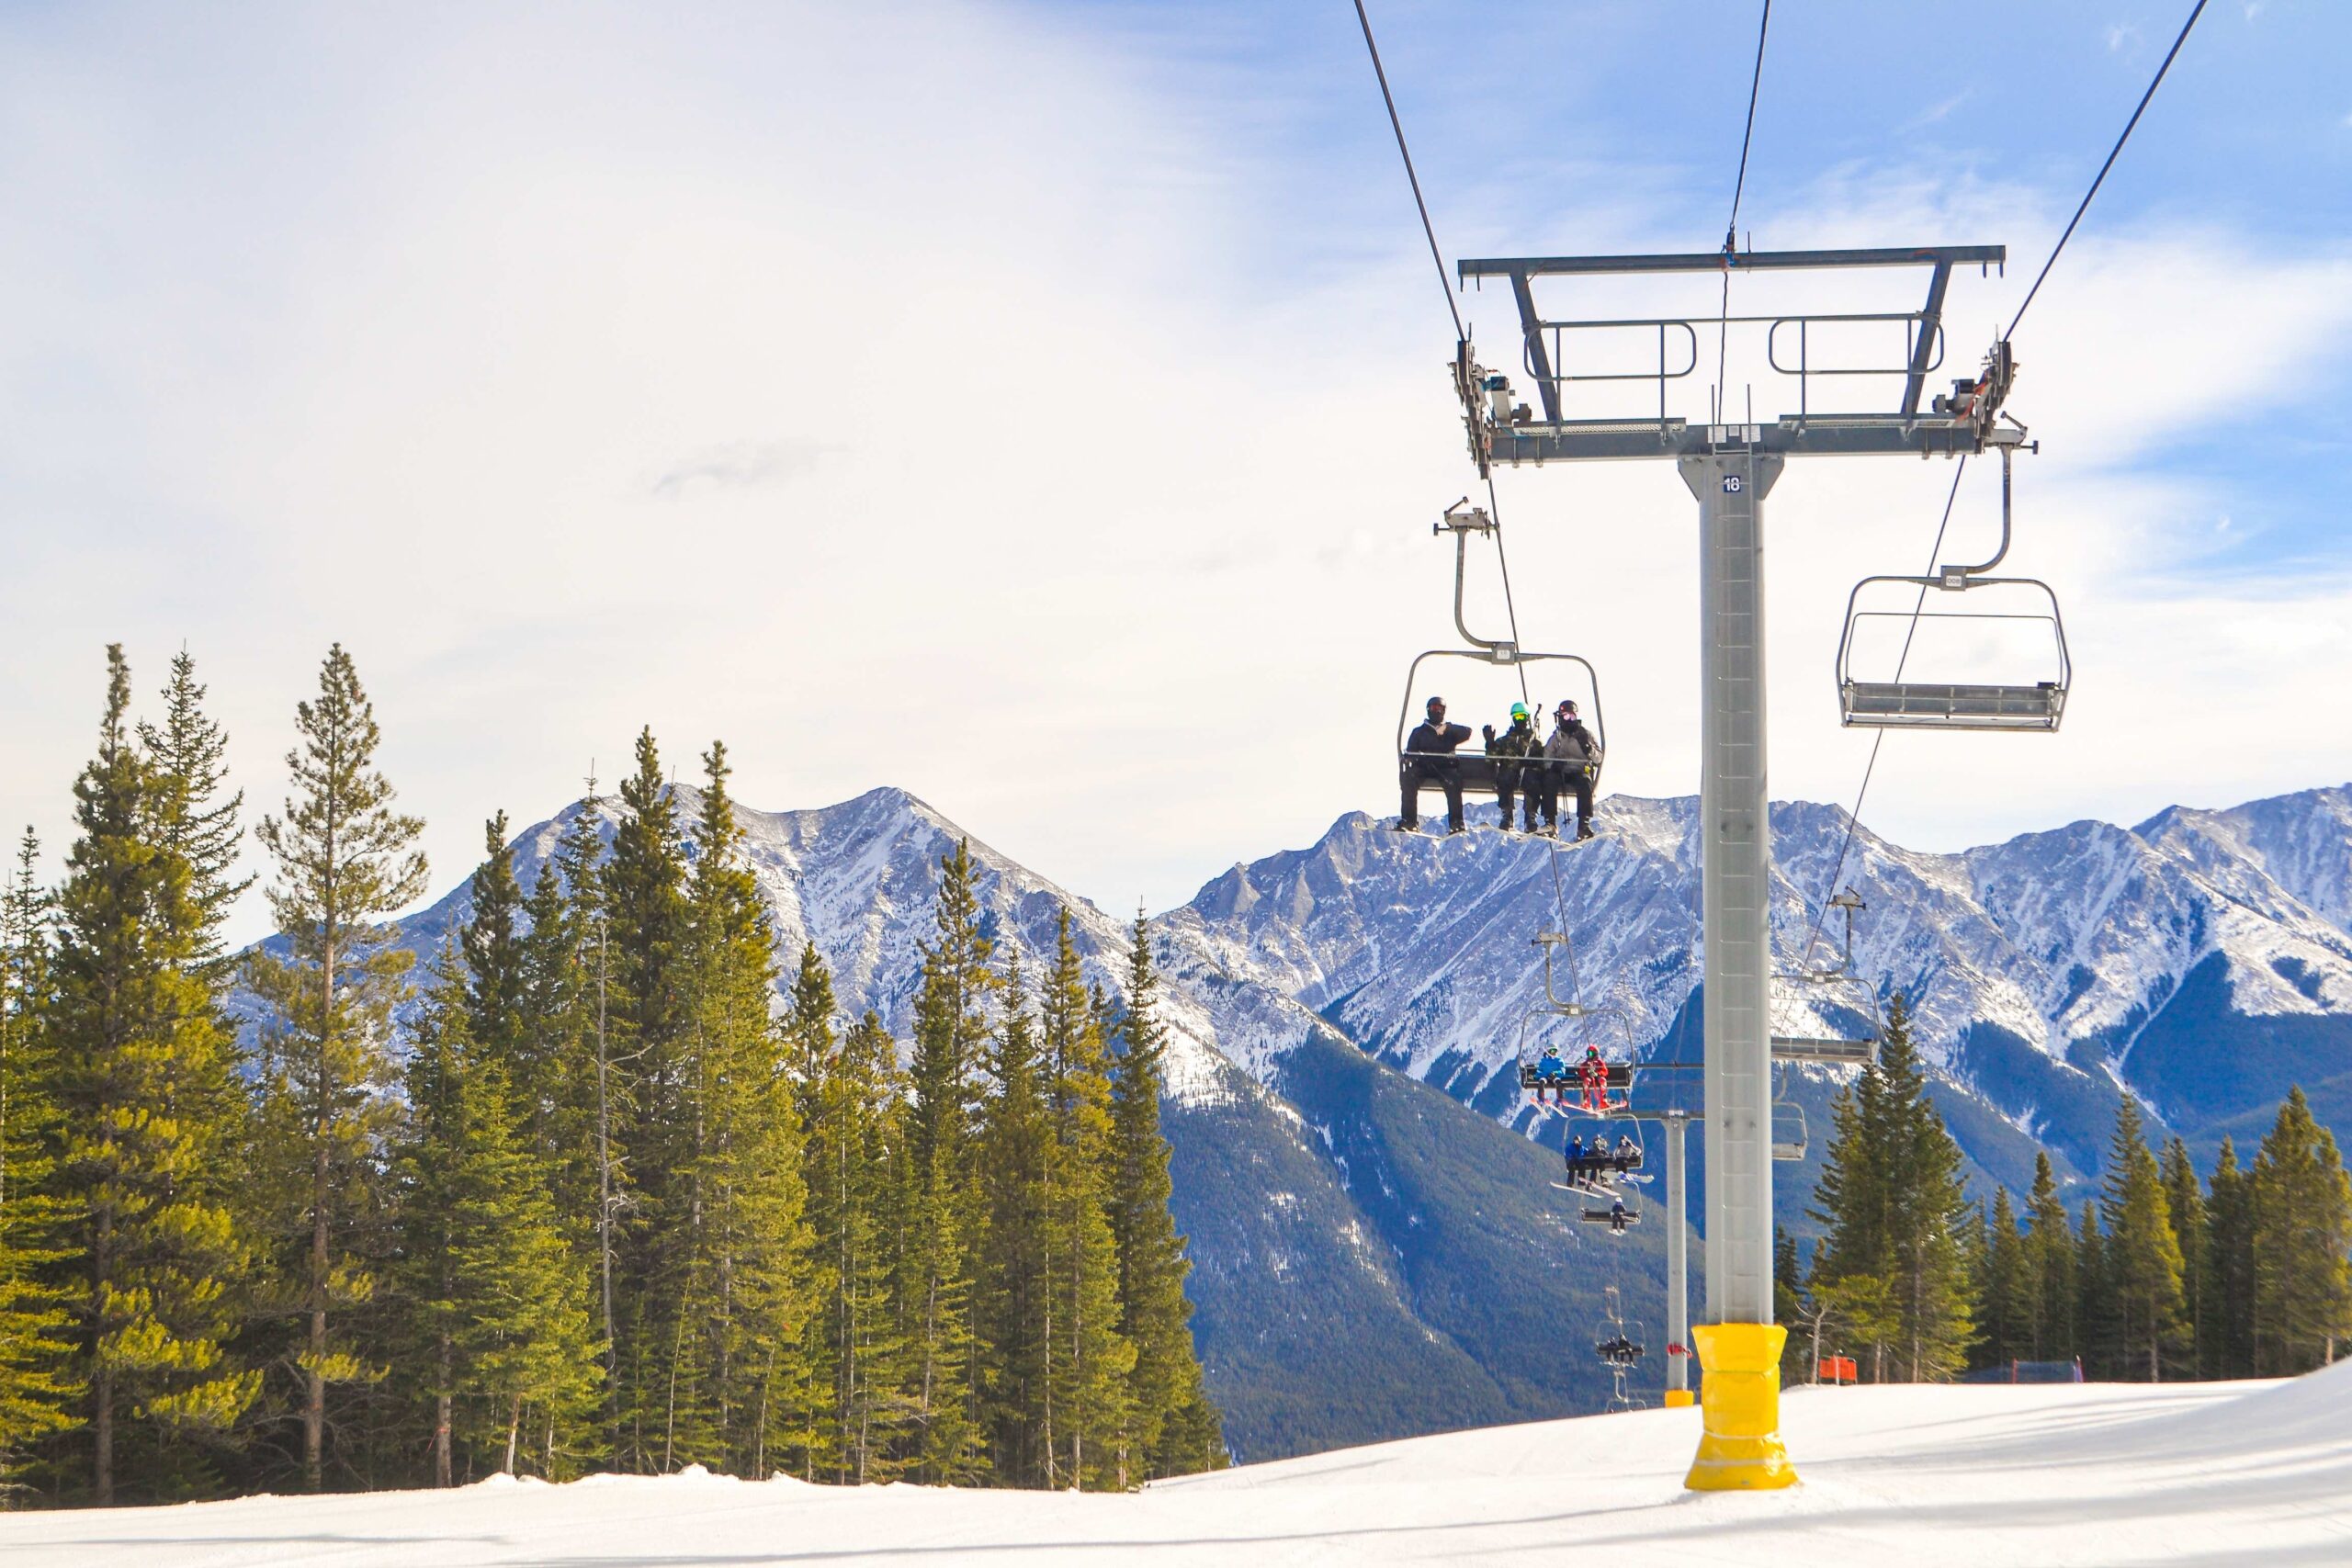 The Nakiska Ski Resort in Kananaskis - the Silver Chairlift with the stunning mountain landscape in the distance